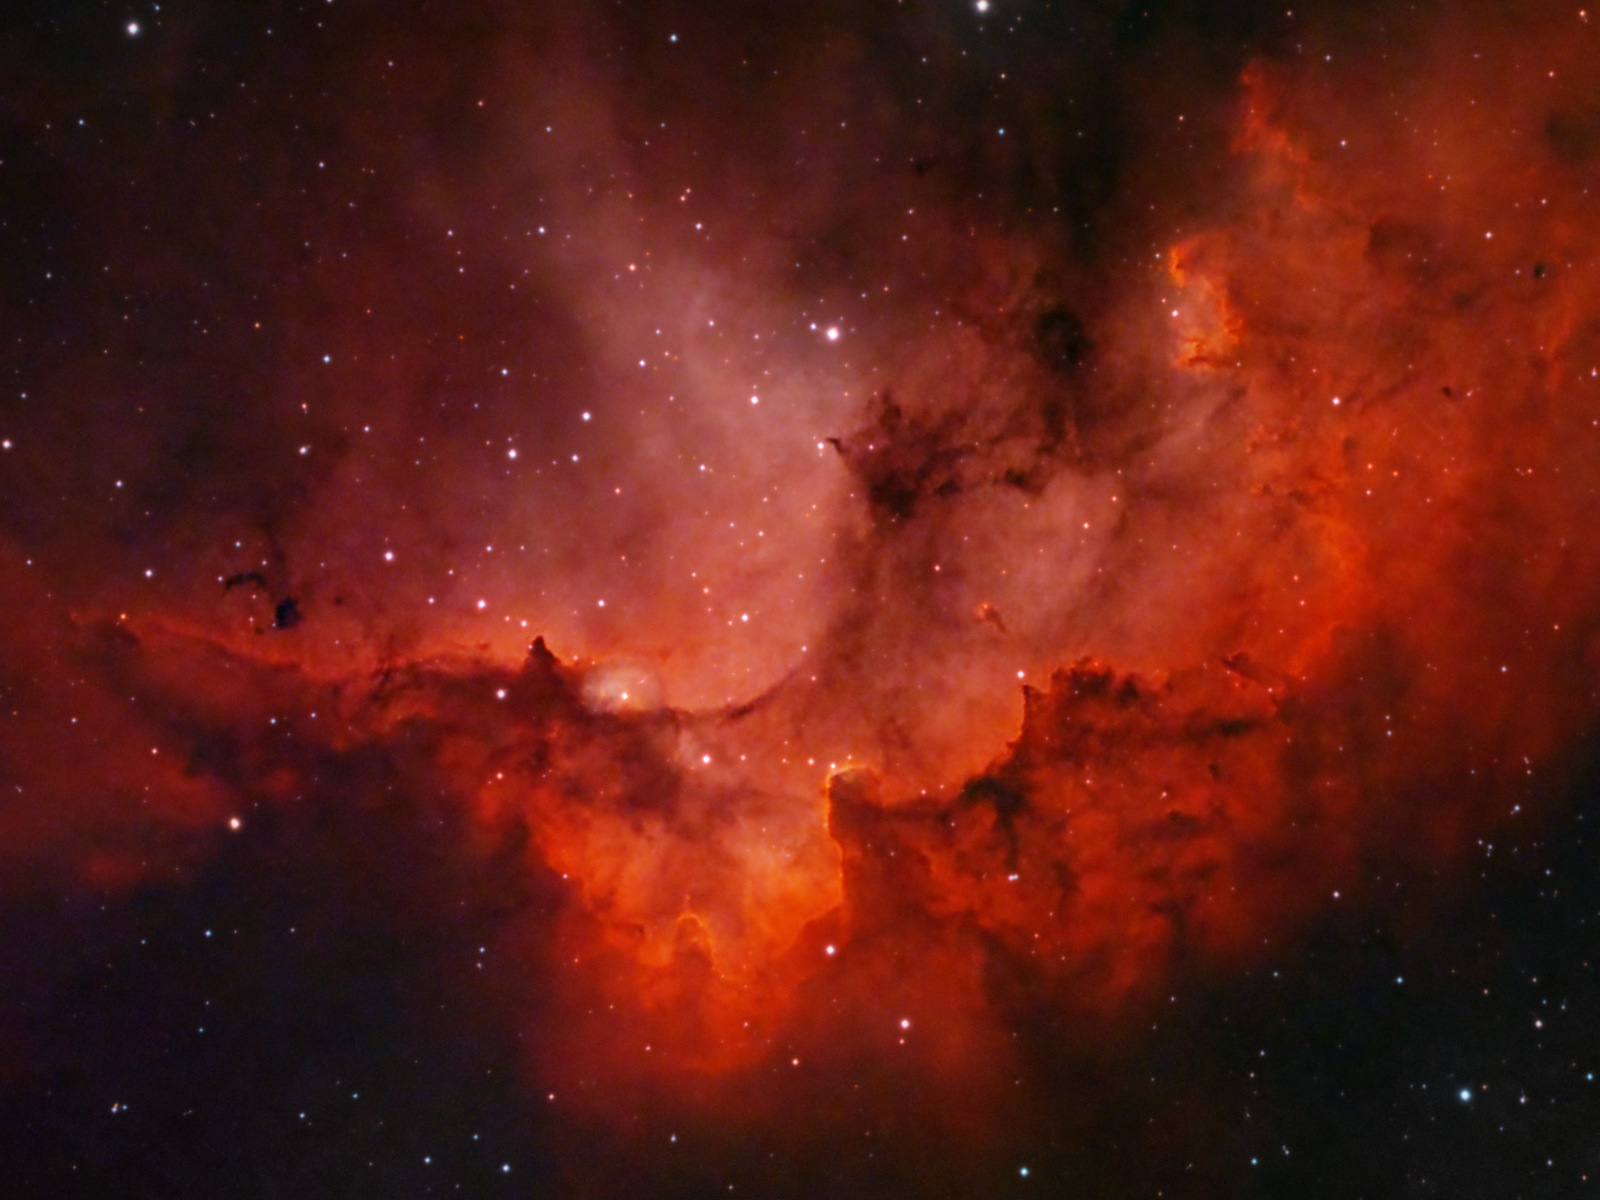 The Wizard Nebula (NGC 7380) just in time for Halloween 